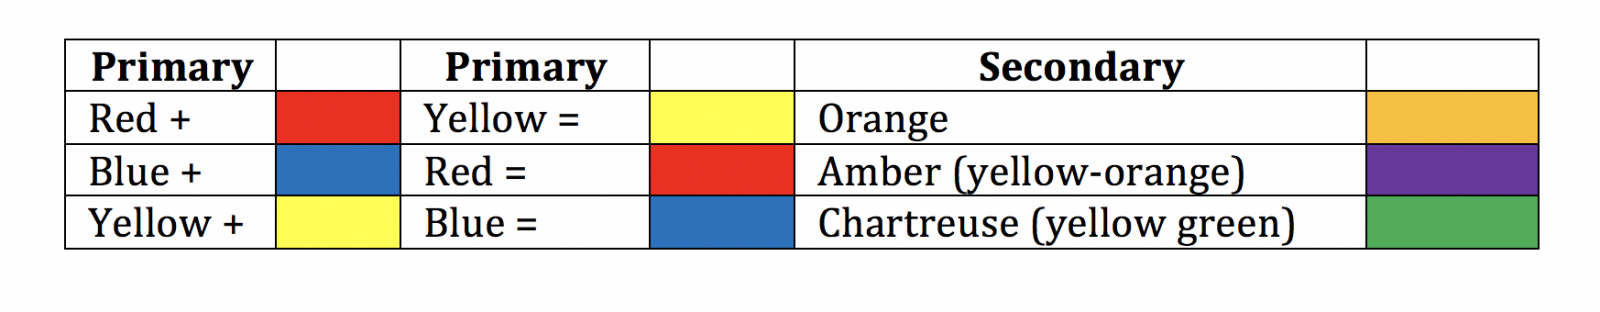 Primary and Secondary color chart